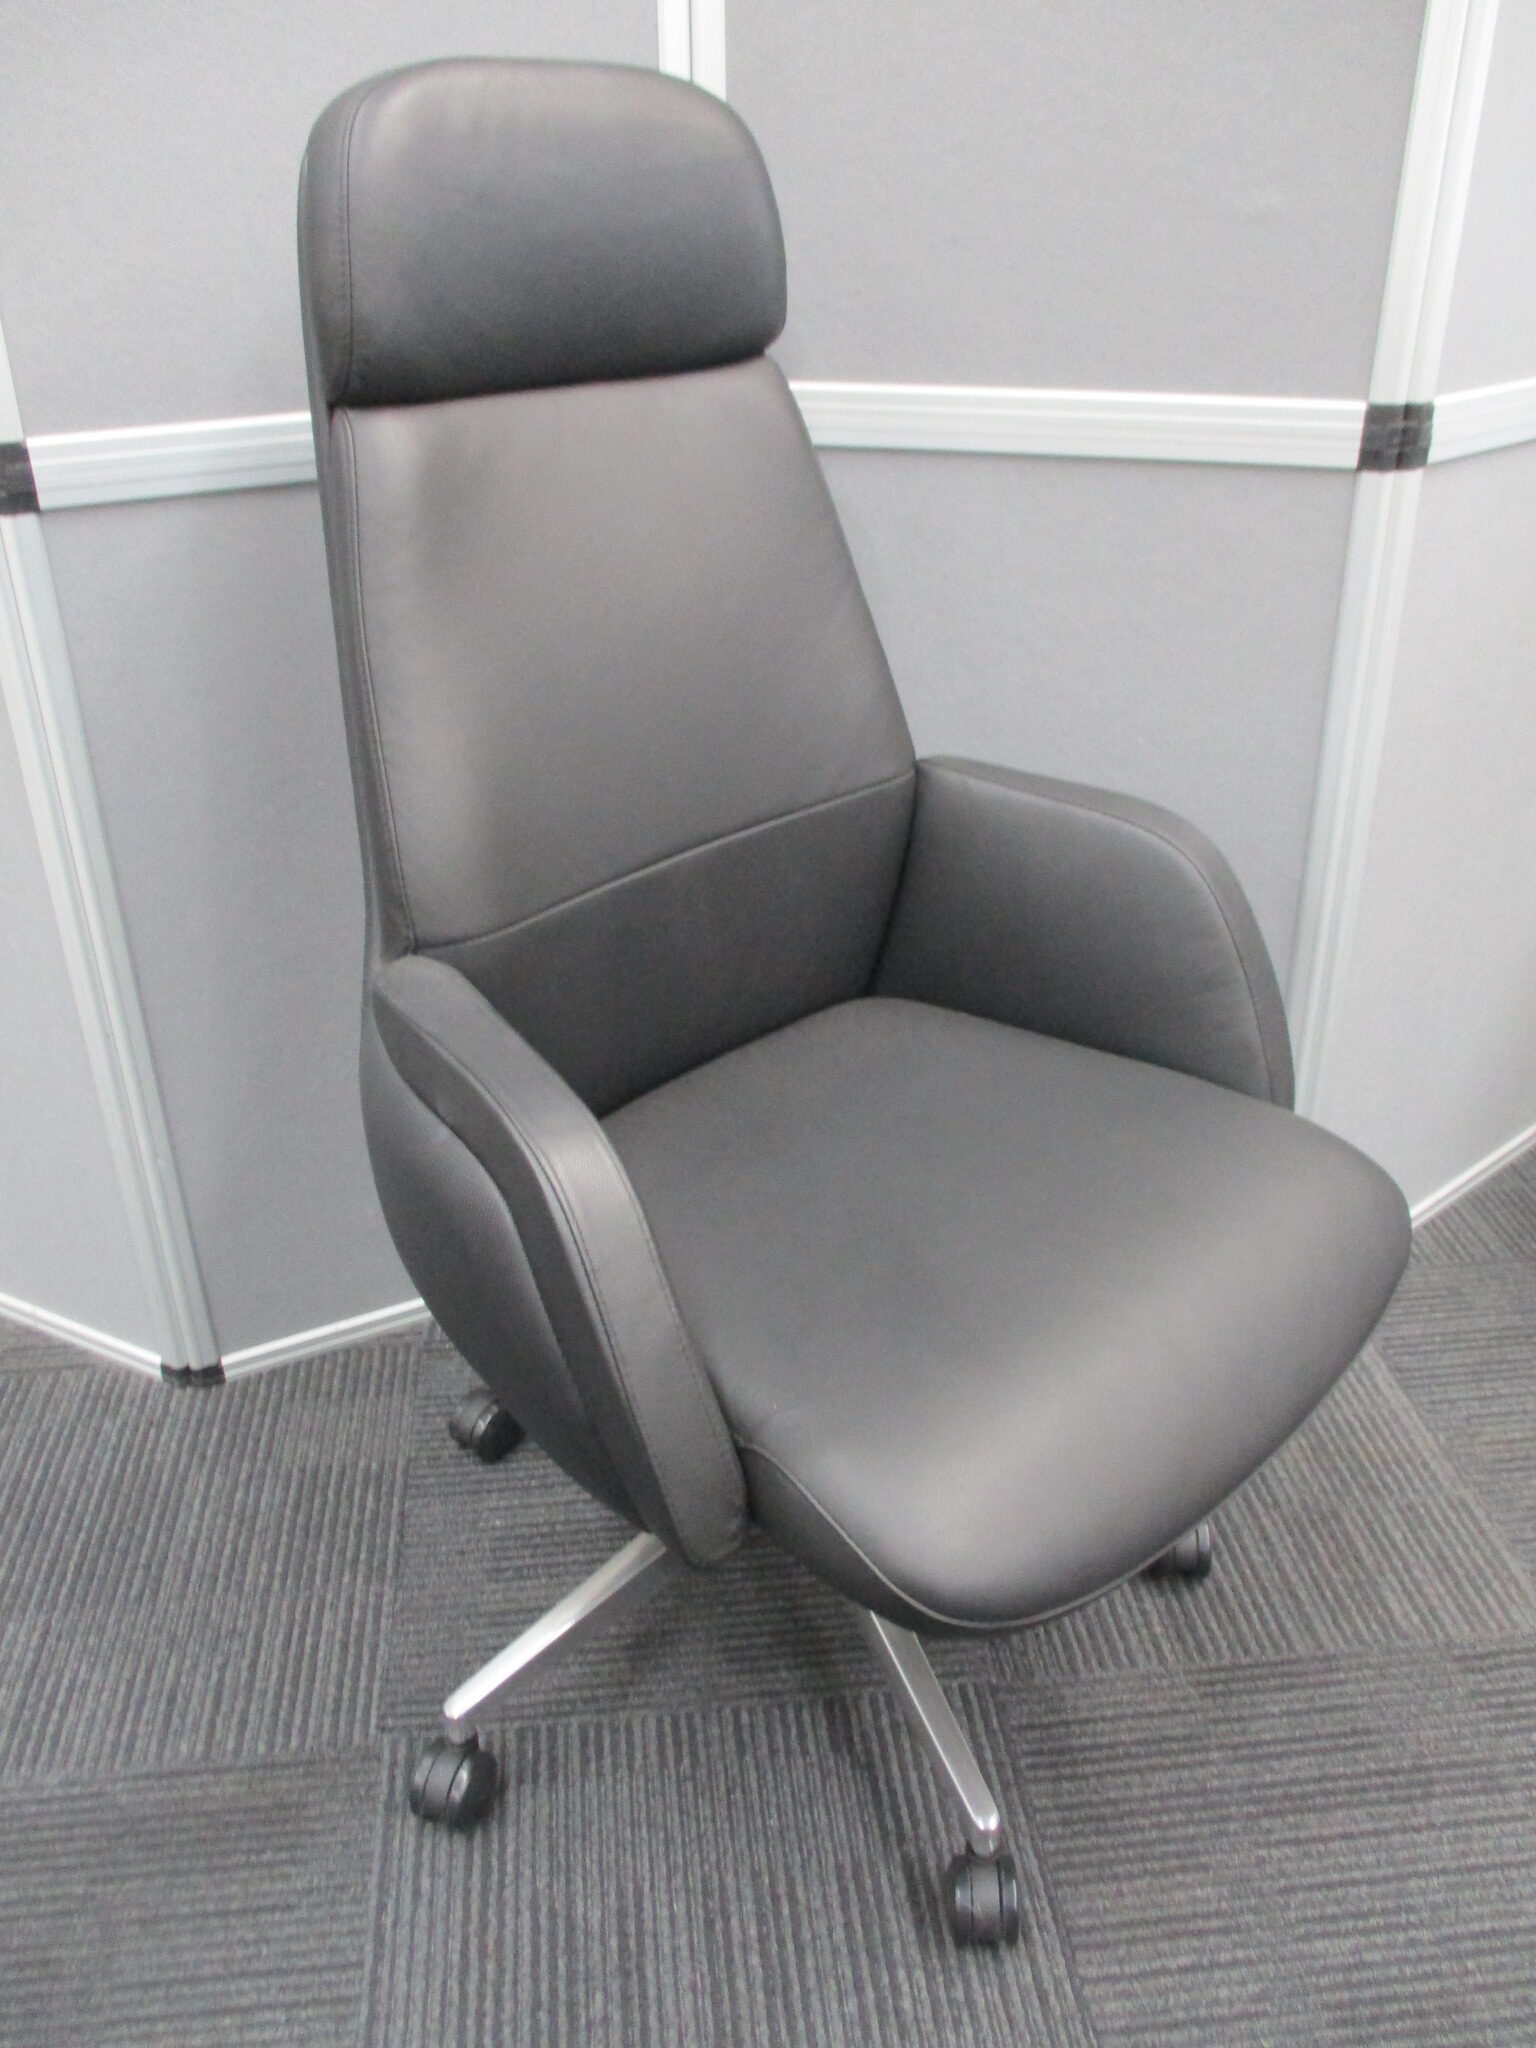 New Captain Executive Leather Chairs $1225